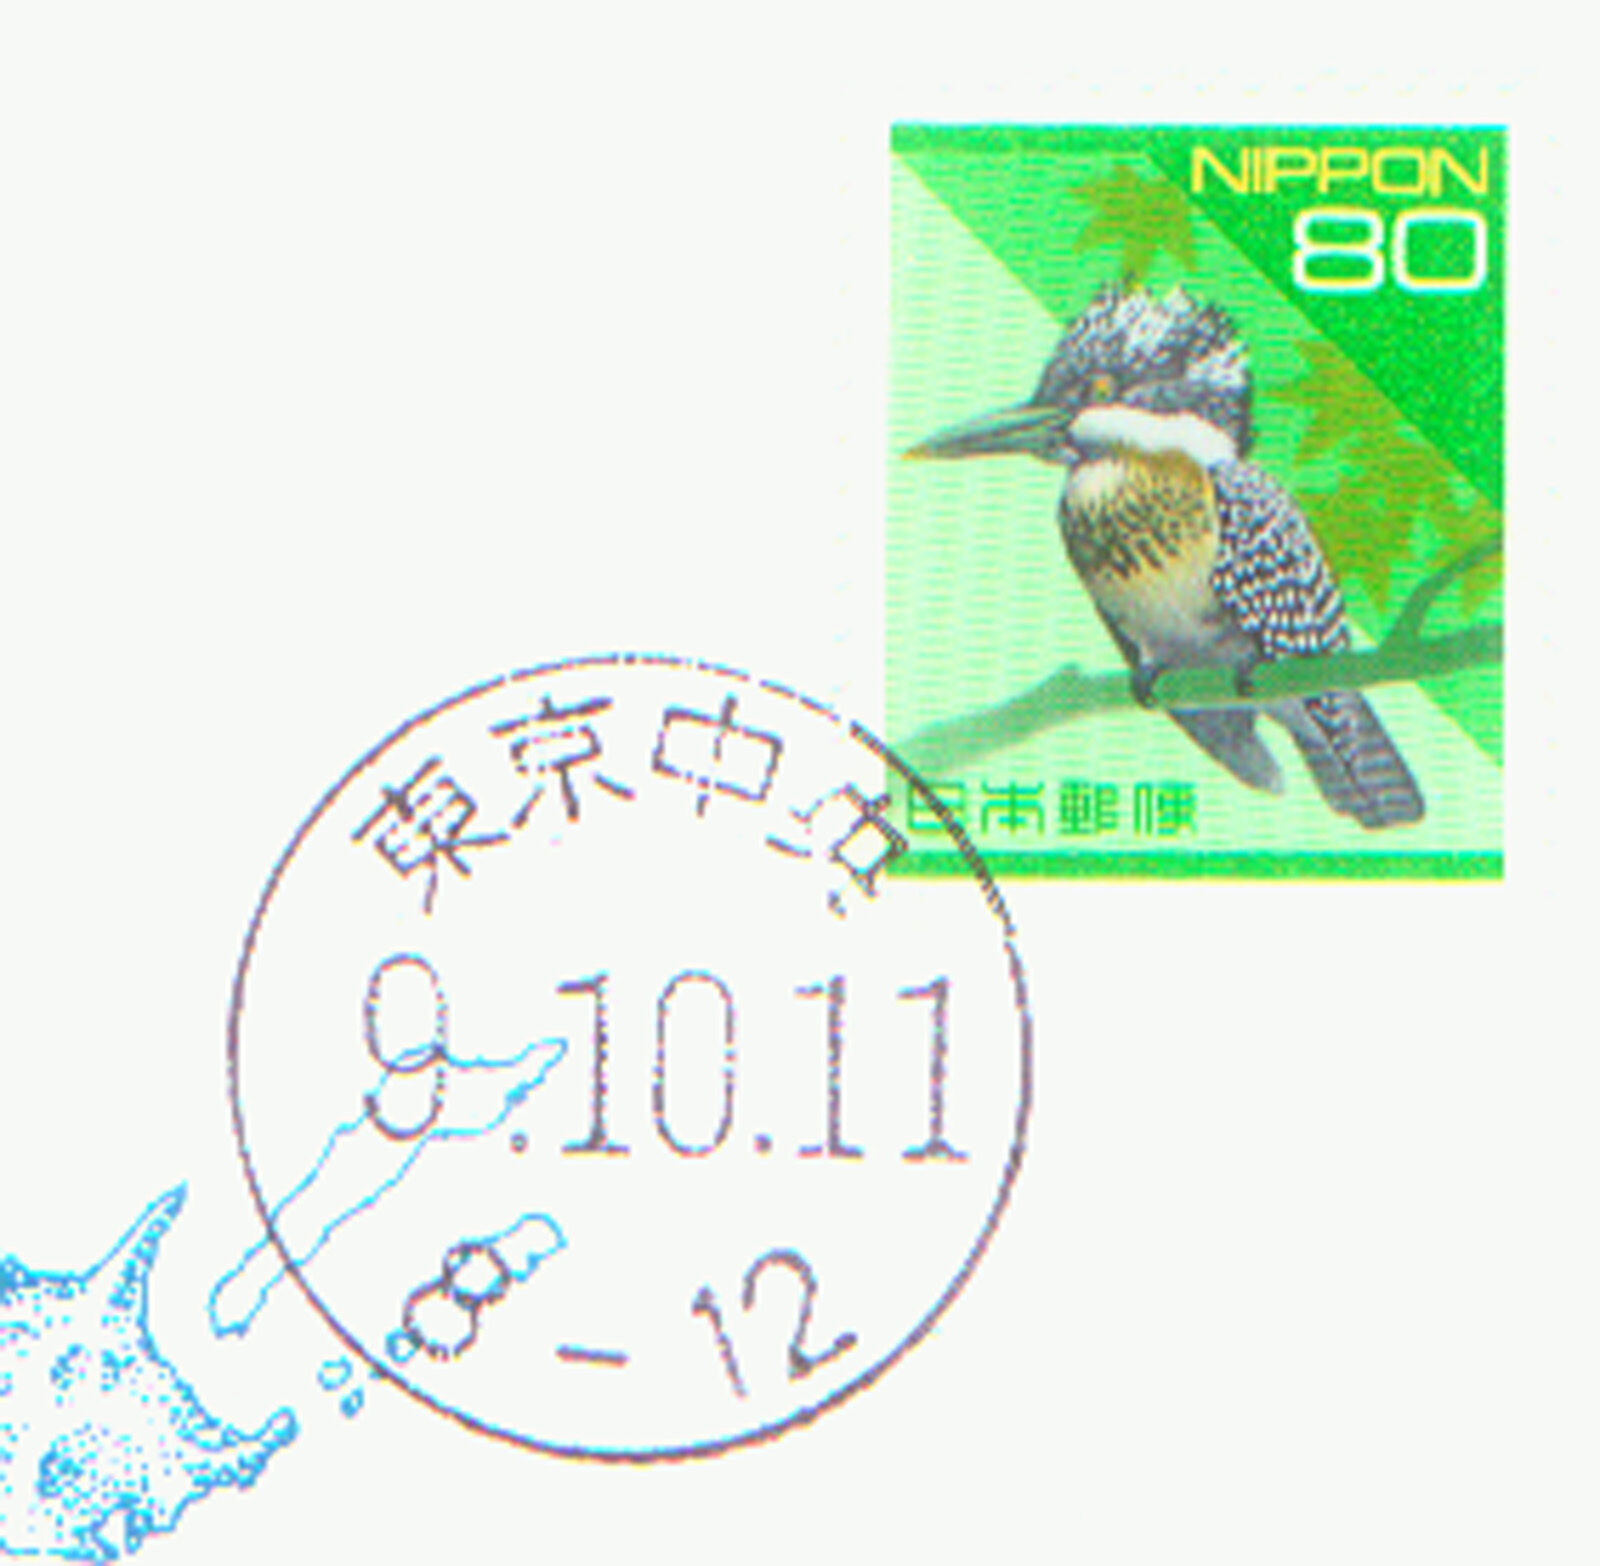 JAPAN BANK NOTE 1000 YEN PICK # 100 STAMPED WINDOWED ENVELOPE with MAP & INFO